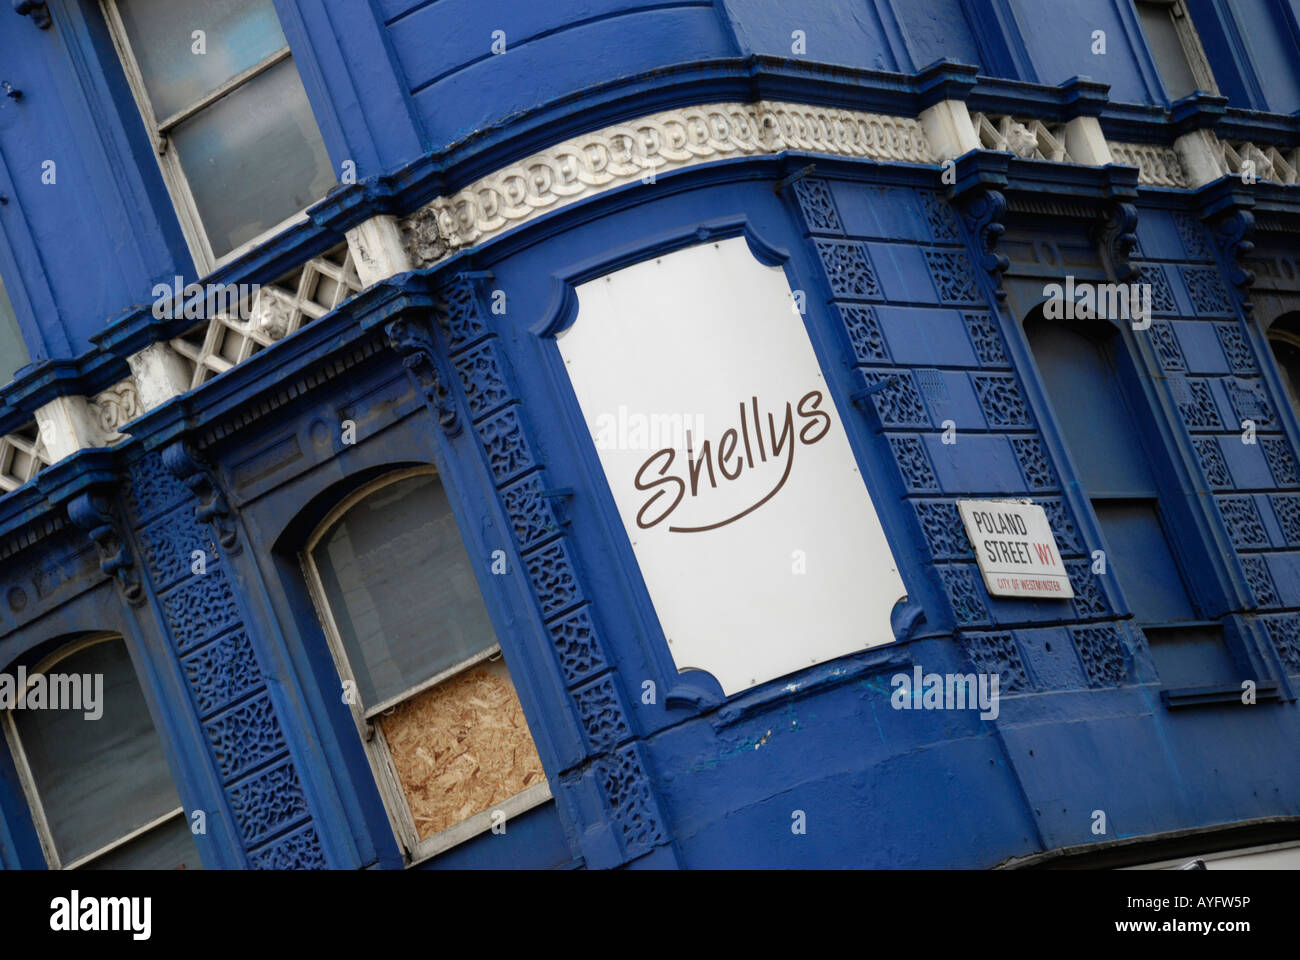 Shellys shellys hi-res stock photography and images - Alamy